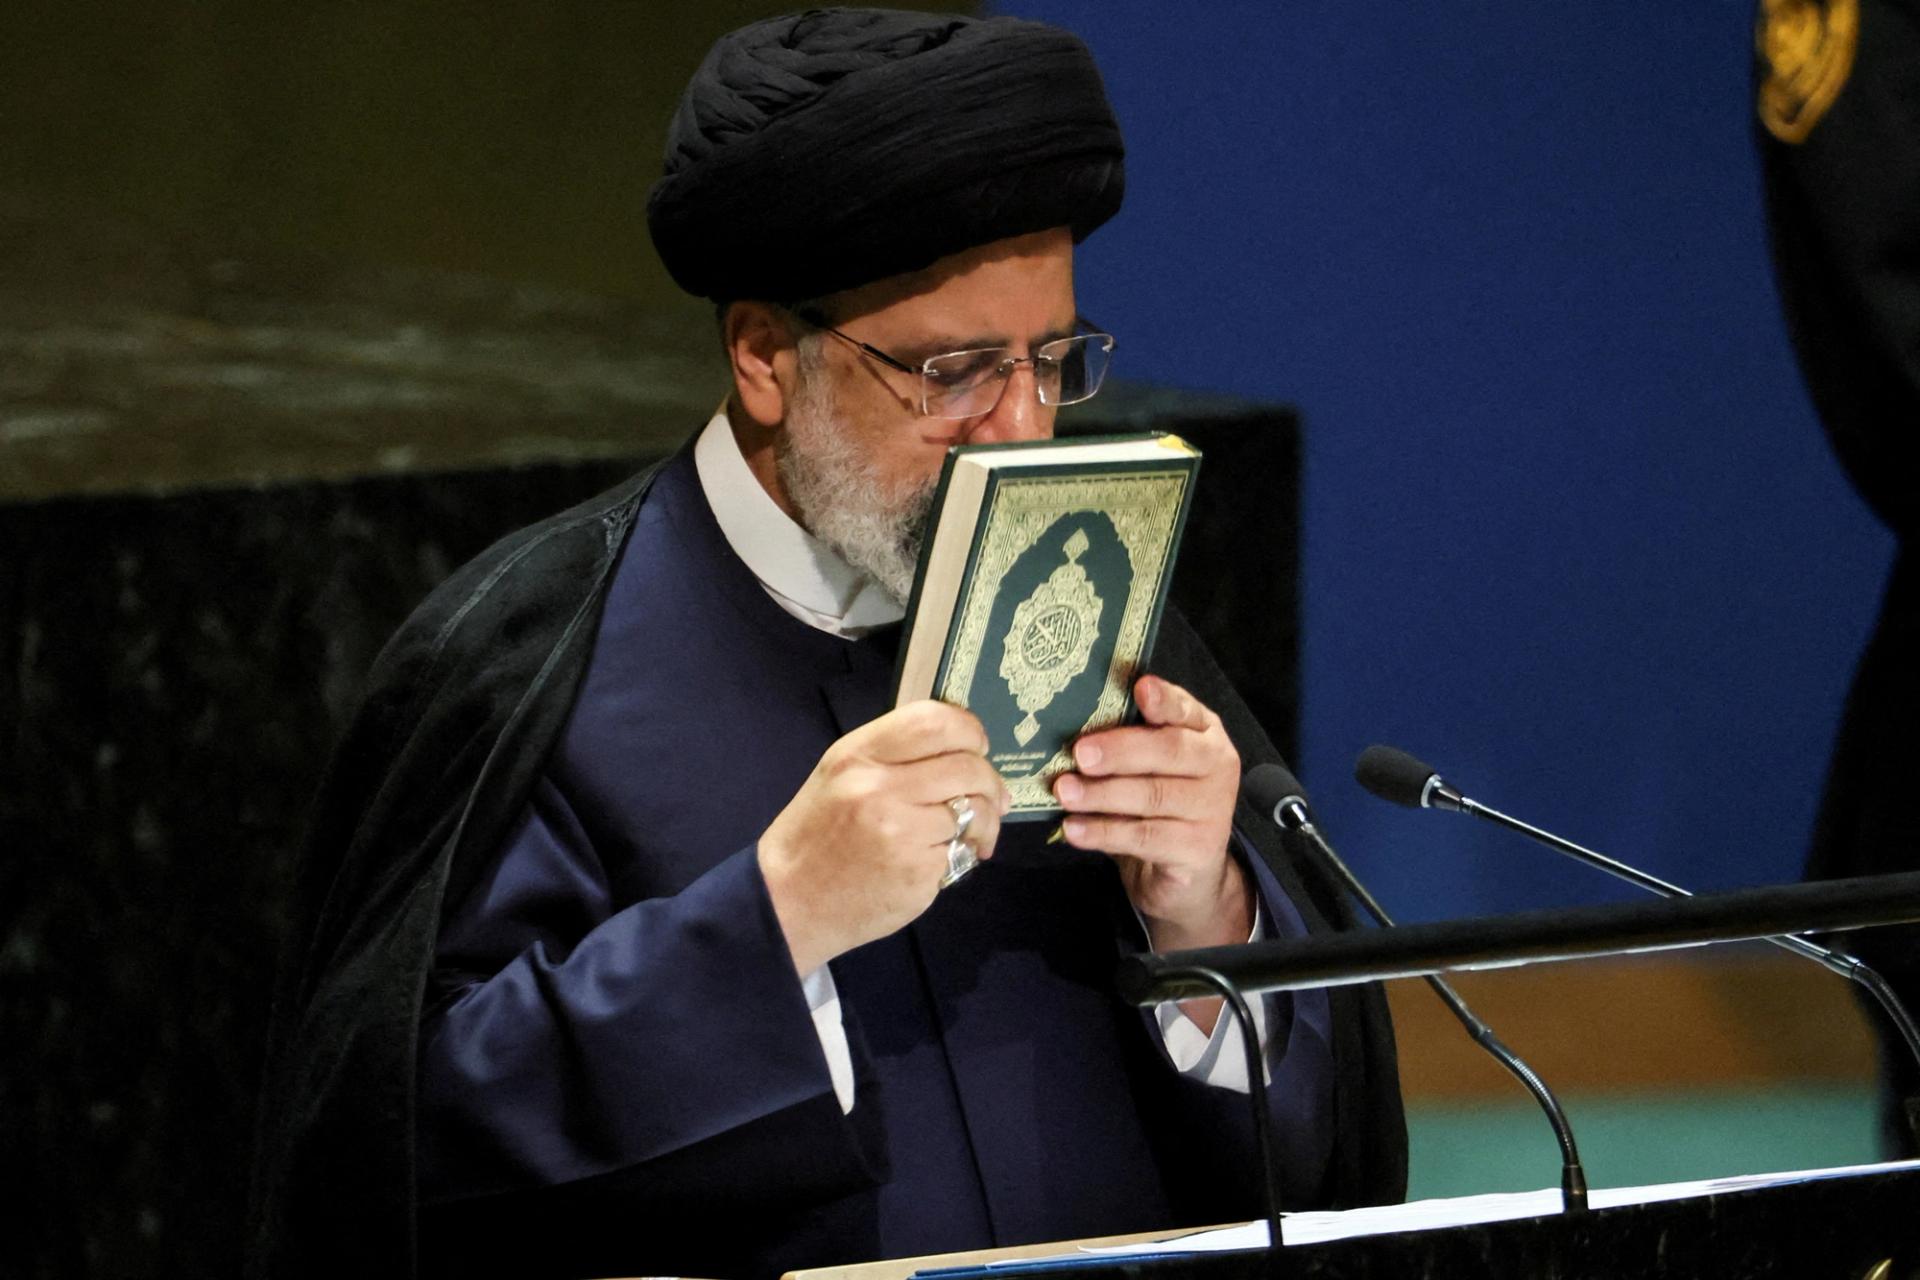 FILE PHOTO: Iran's President Ebrahim Raisi kisses the holy Koran as he addresses the 78th Session of the U.N. General Assembly in New York City, U.S., September 19, 2023. REUTERS/Brendan McDermid/File Photo